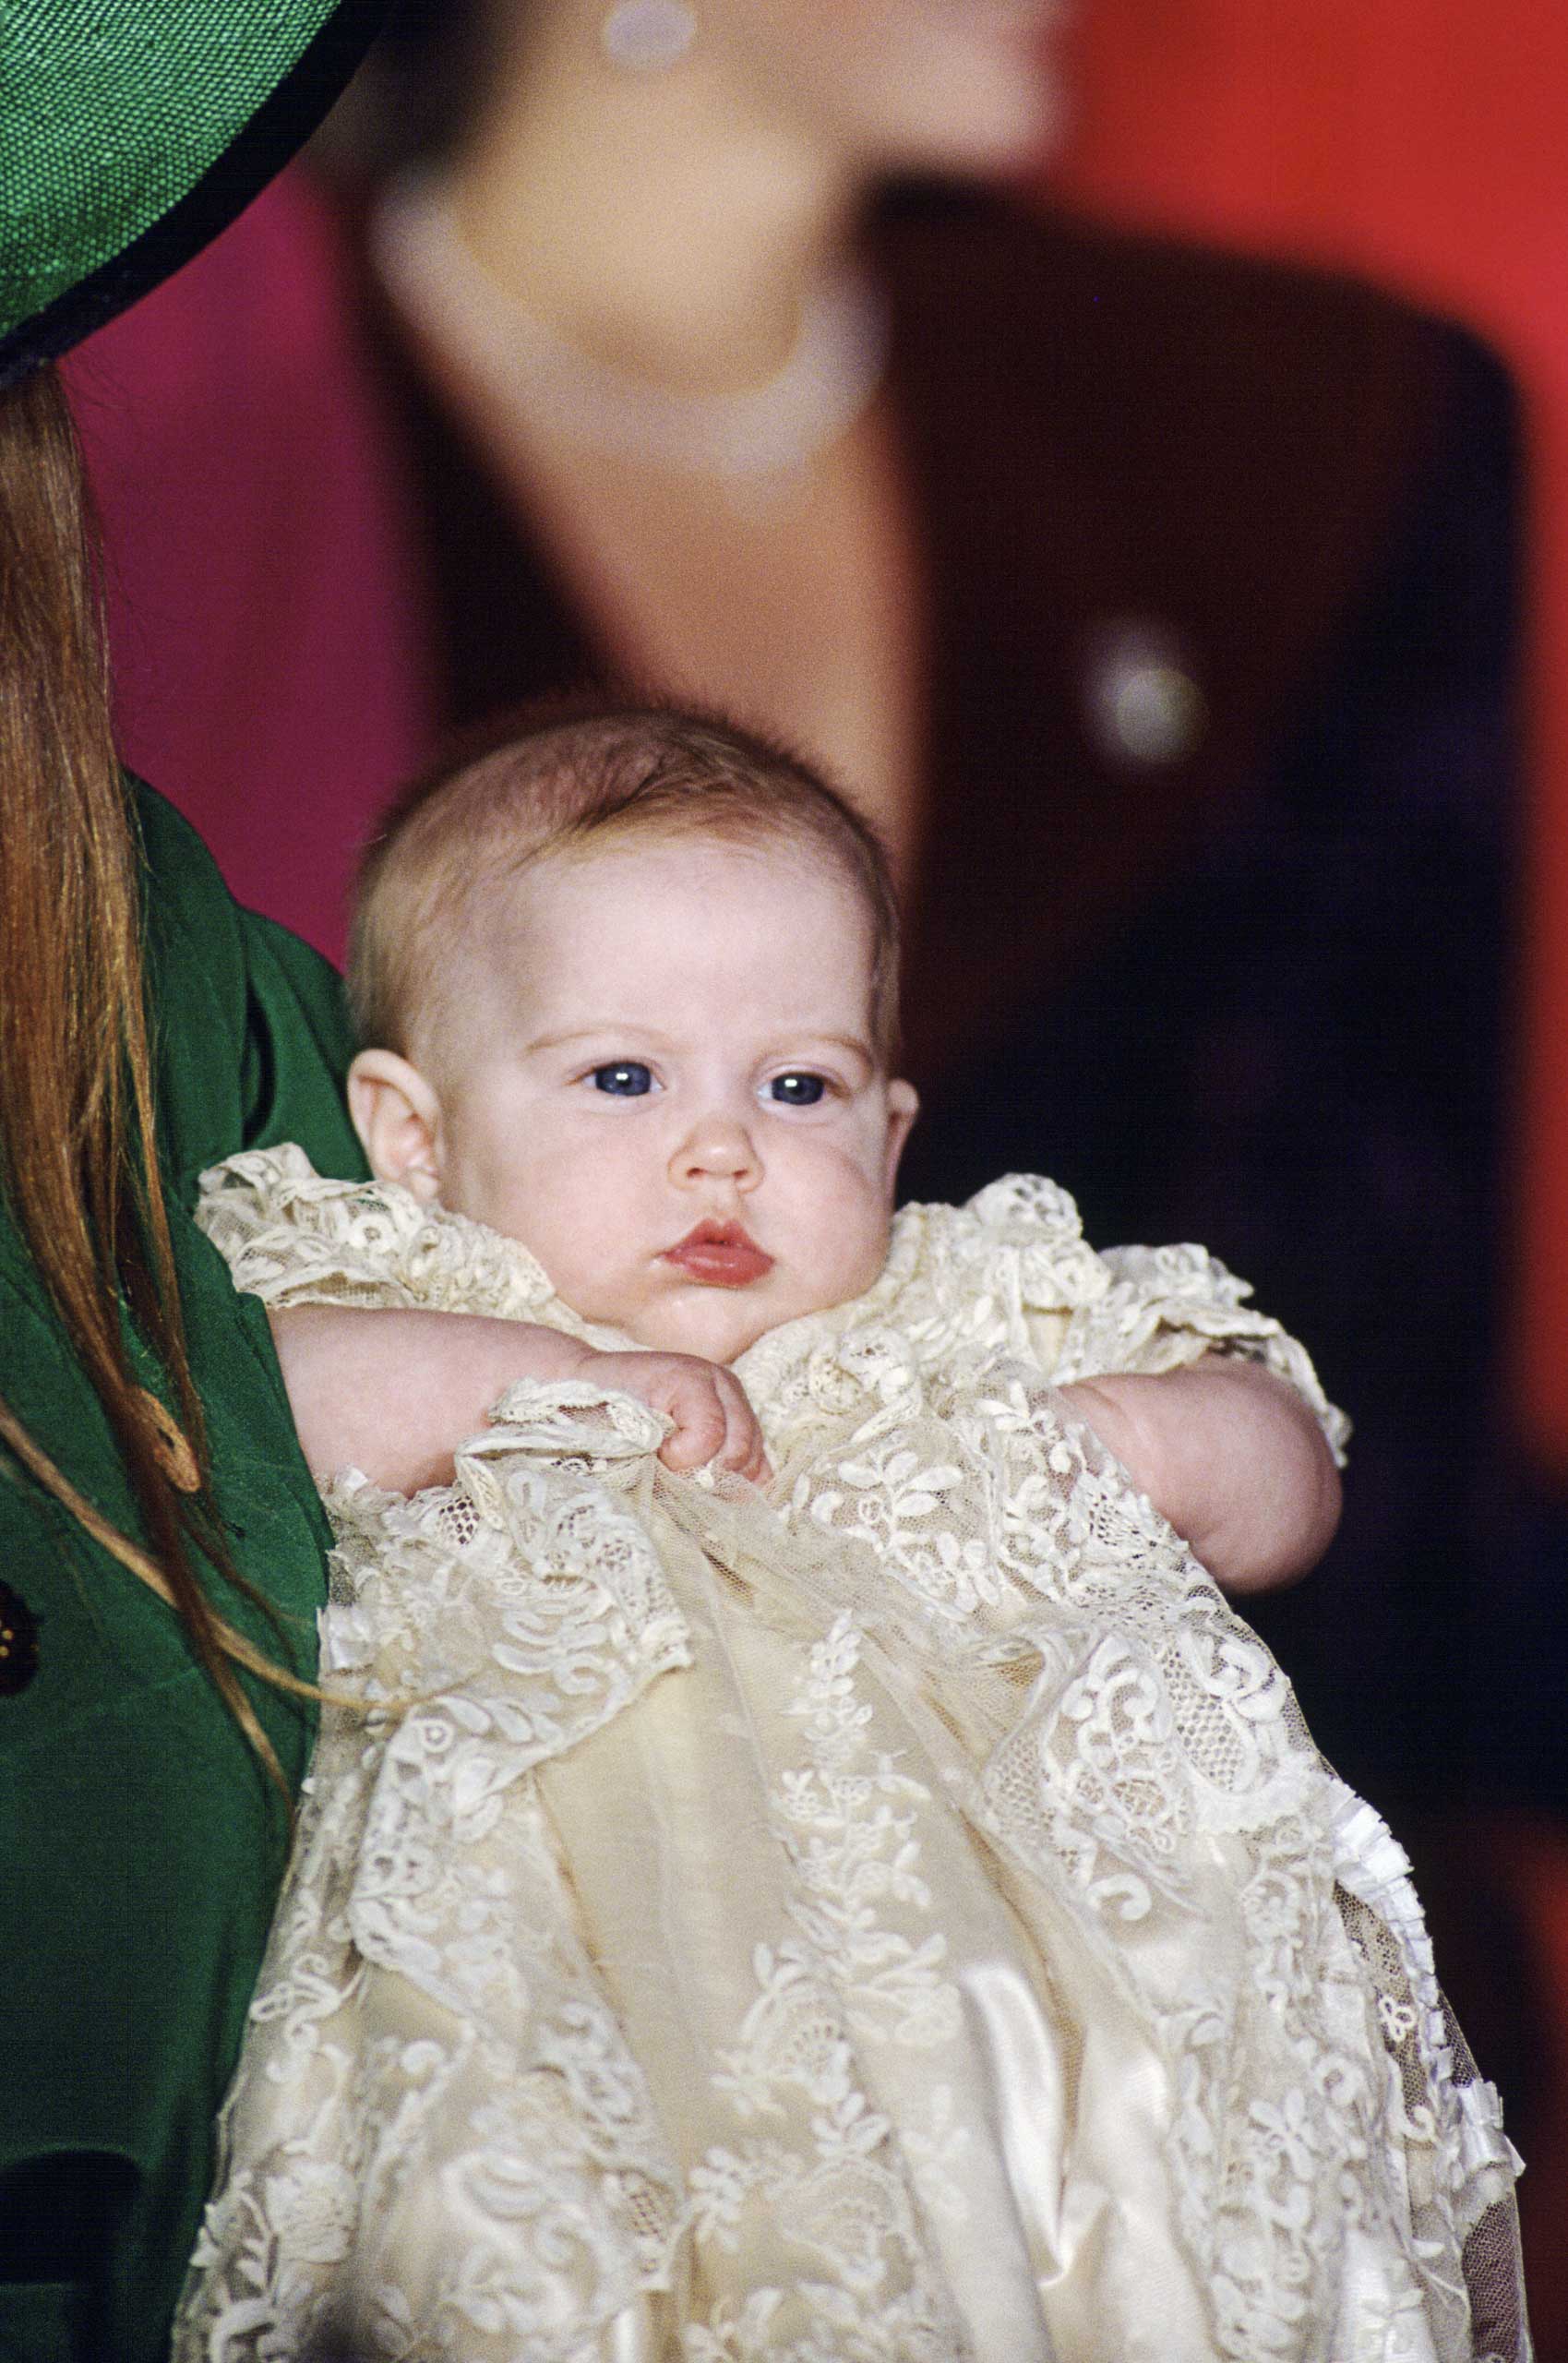 The spitting image of her dad Prince Andrew, but for the red hair inherited from mother Sarah, Duchess of York, Princess Beatrice looks pensive at her 1988 christening.